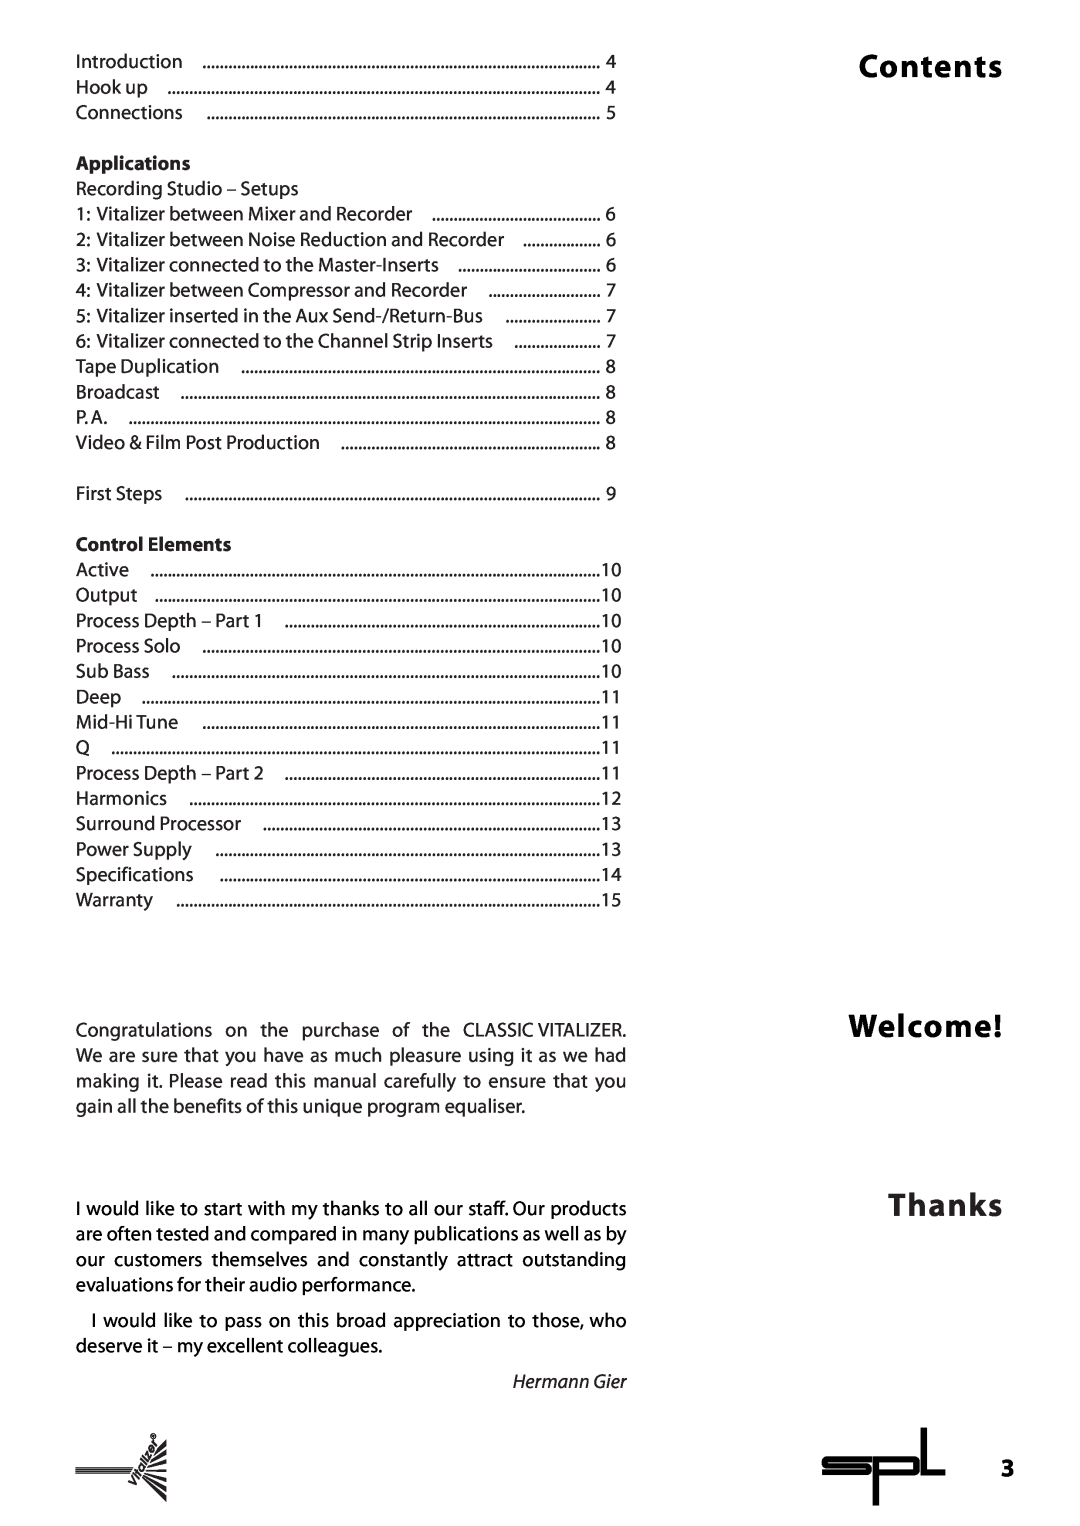 Sound Performance Lab 9215 manual Contents Welcome Thanks, Applications, Control Elements 